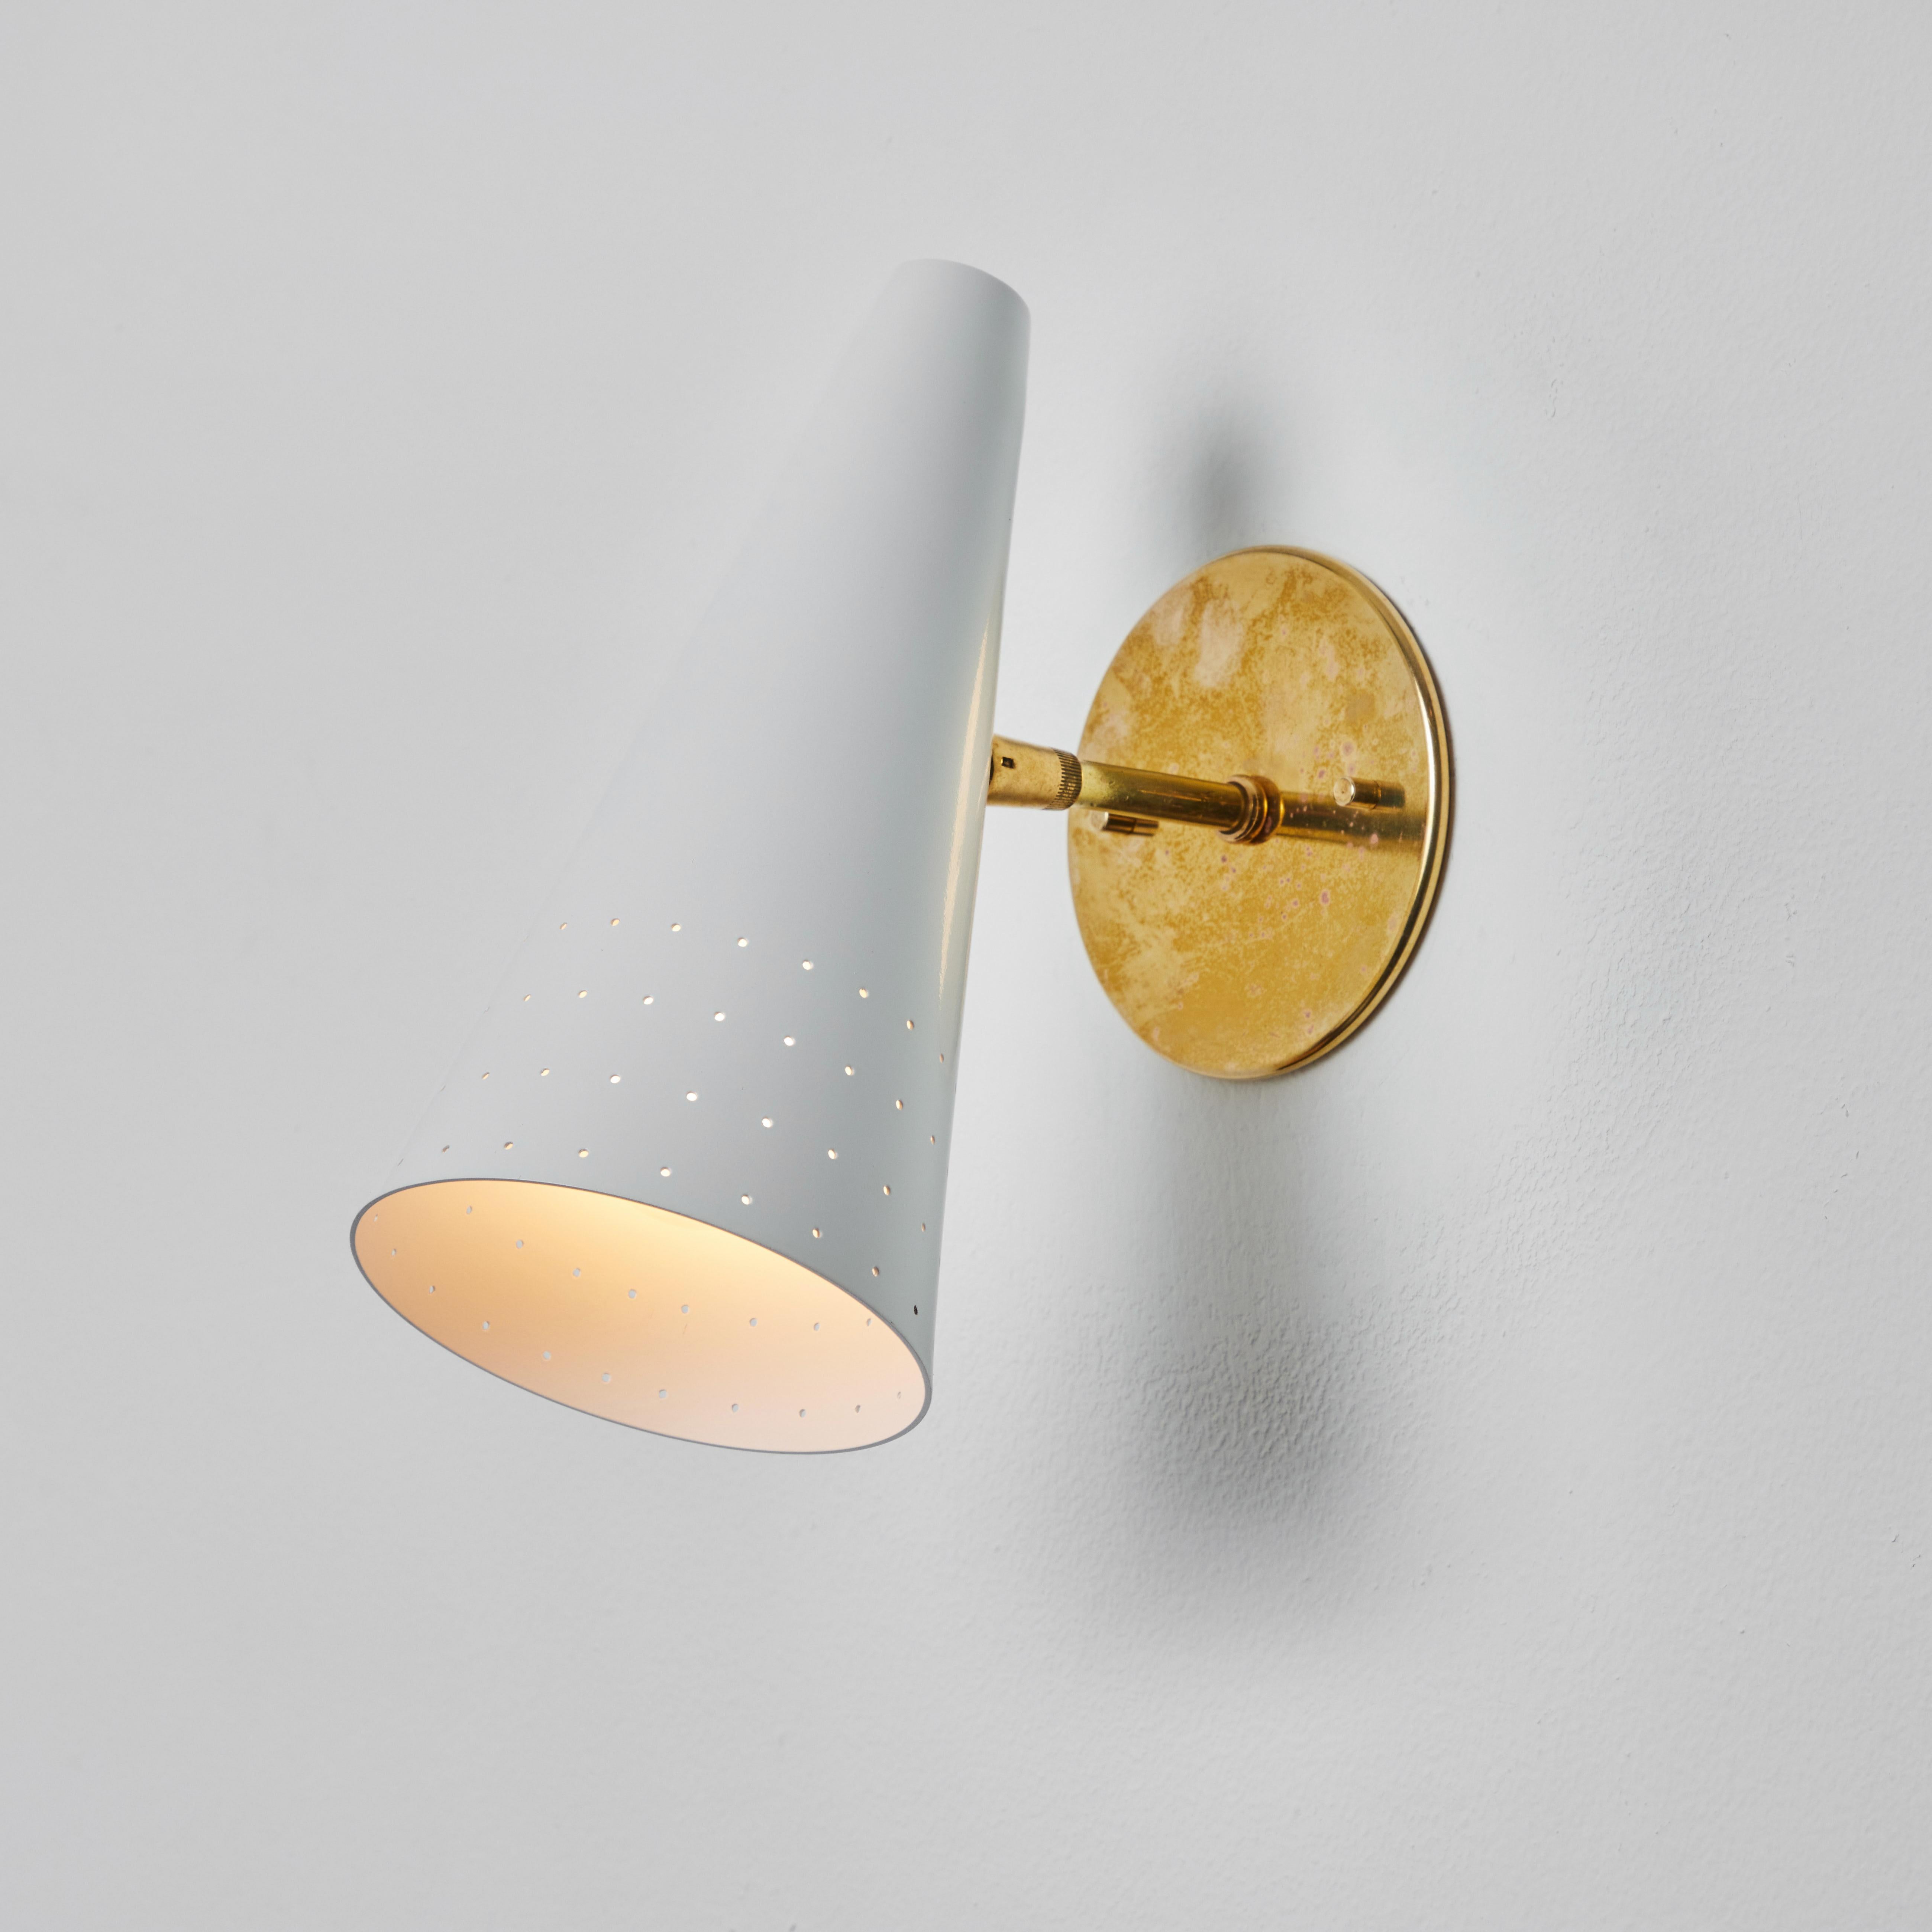 1950s Italian white perforated cone sconce attributed to Gino Sarfatti. Executed in brass and white painted aluminum. 

Arteluce was one of the most innovative lighting design companies in Italy during the midcentury era, with Sarfatti their